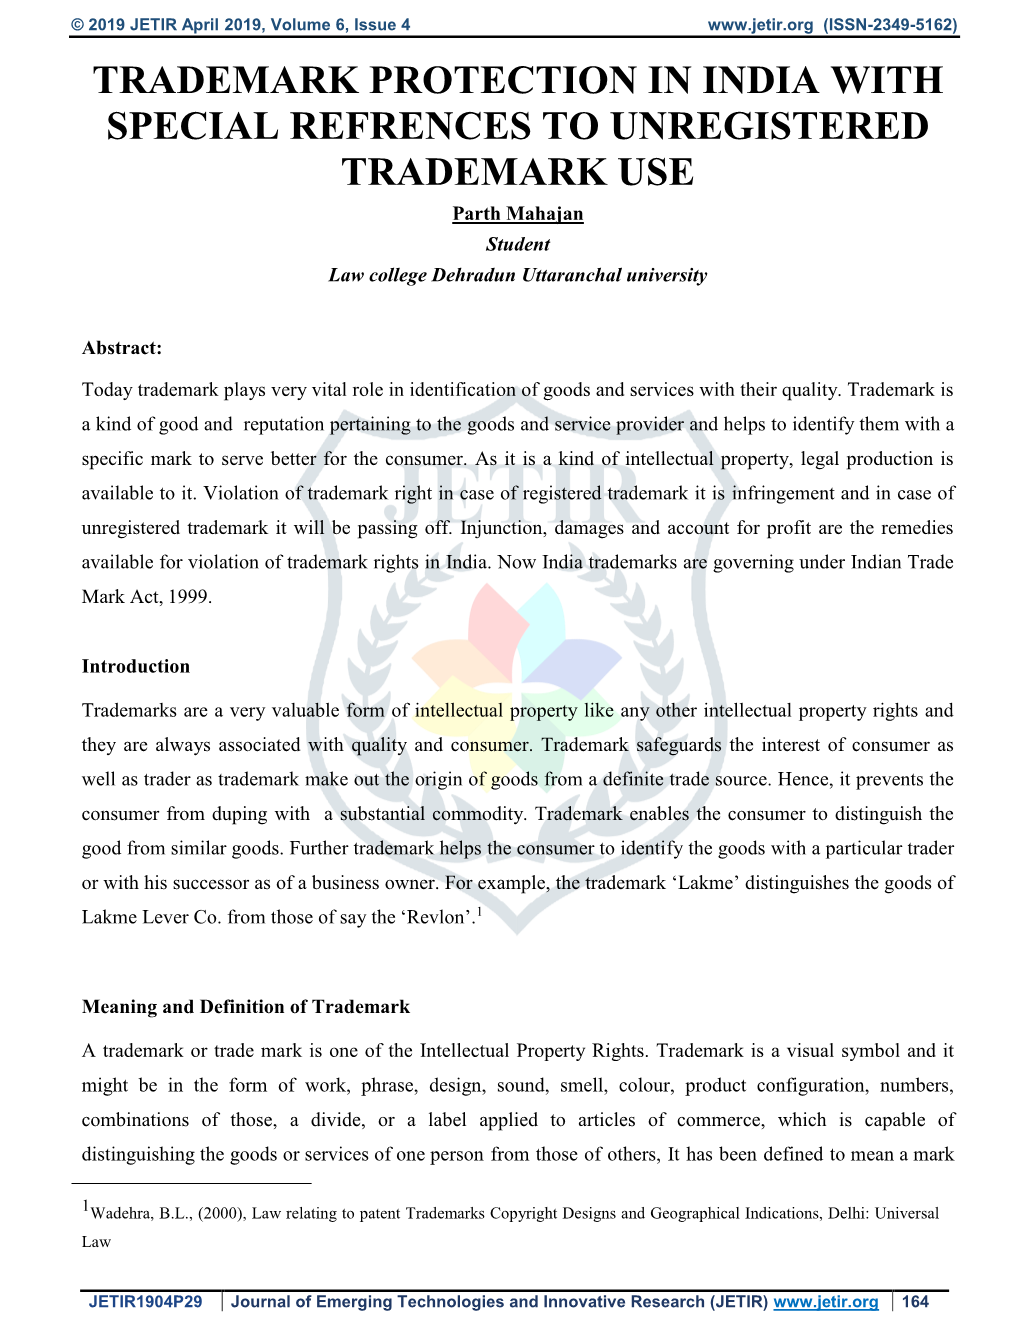 TRADEMARK PROTECTION in INDIA with SPECIAL REFRENCES to UNREGISTERED TRADEMARK USE Parth Mahajan Student Law College Dehradun Uttaranchal University